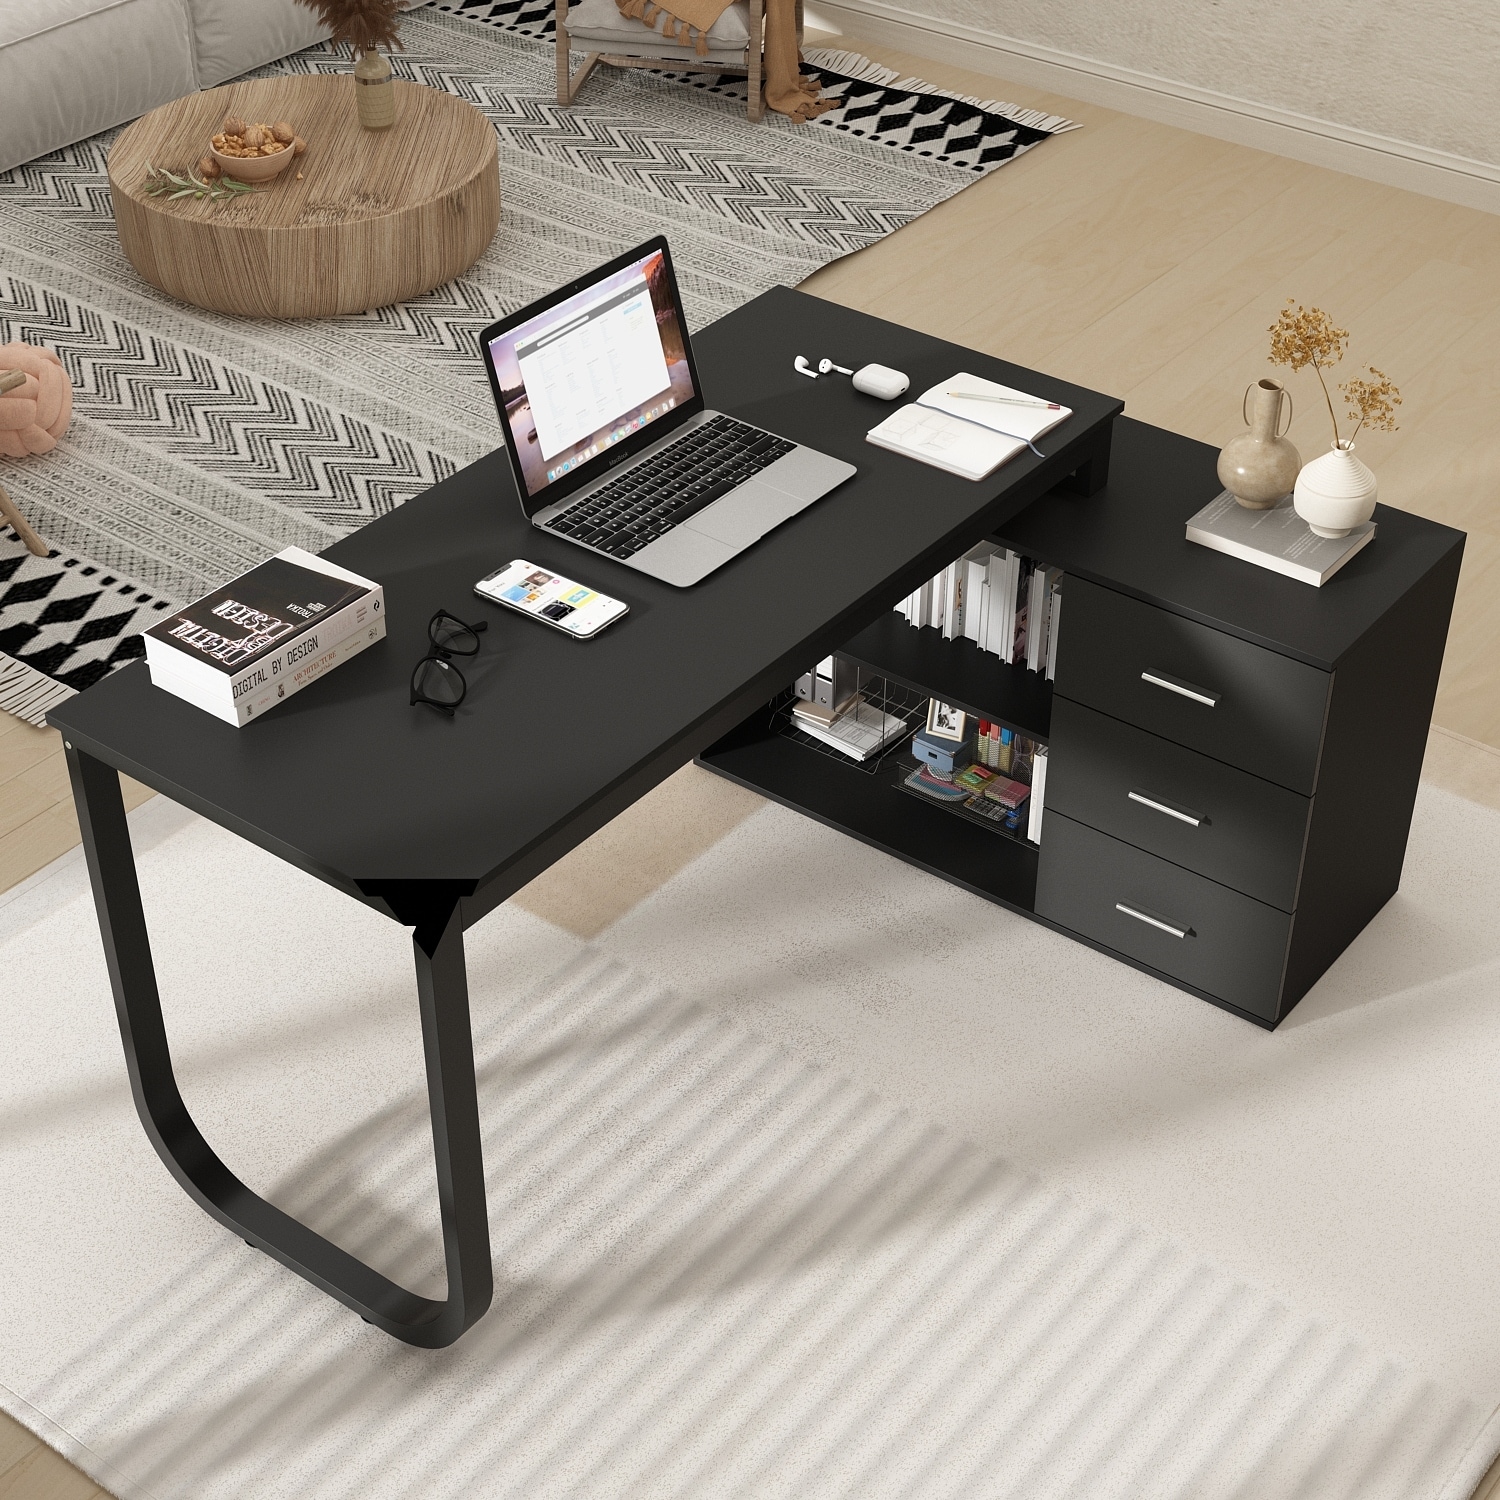 Glide Modern 3-drawer Wood and Metal Office Desk, 58-inches wide - On Sale  - Bed Bath & Beyond - 31294183